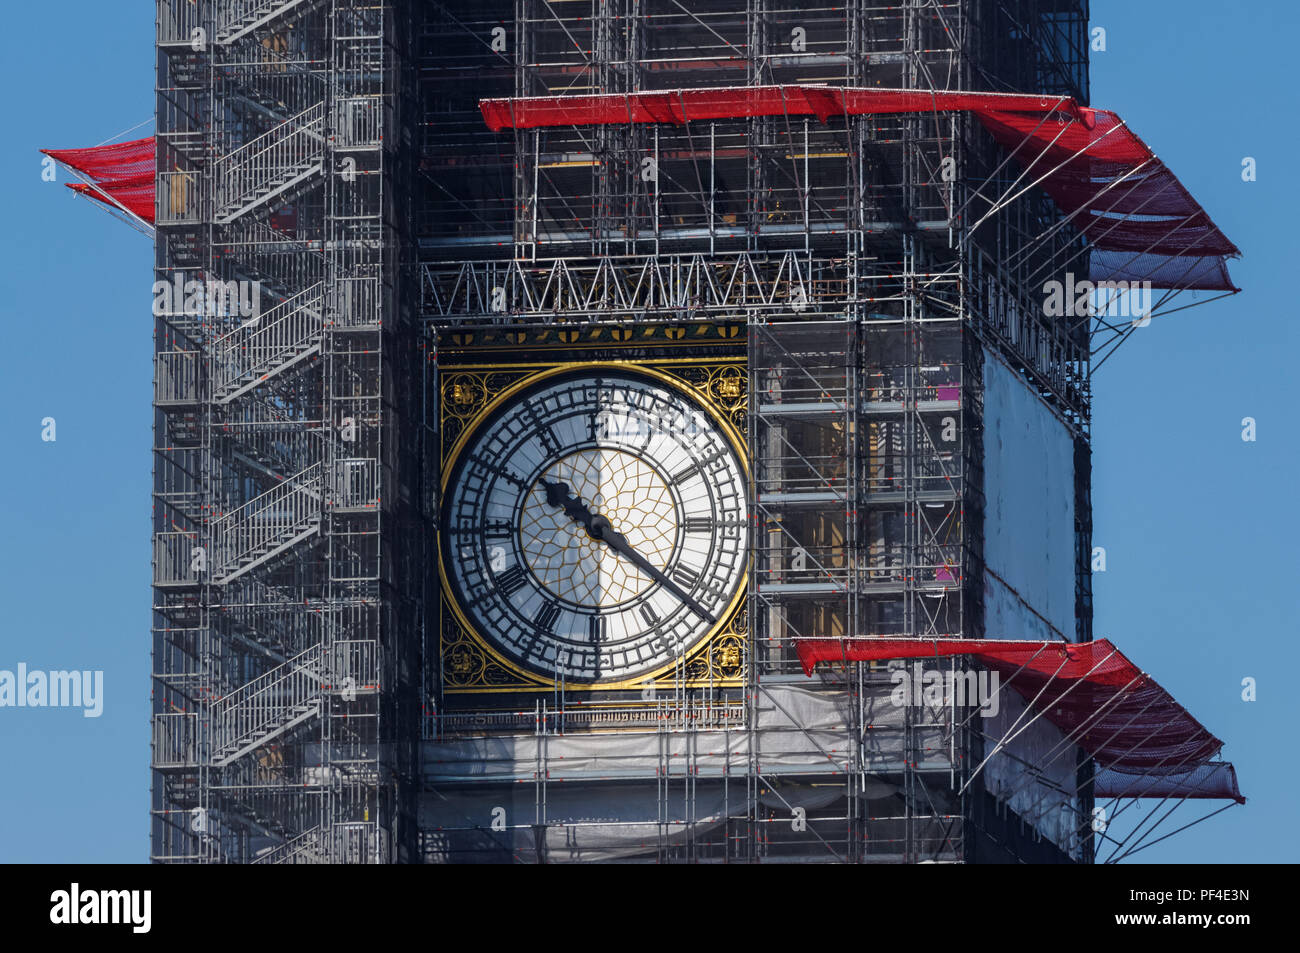 Elizabeth Tower (Big Ben) and the Palace of Westminster covered in scaffolding during maintenance work, London England United Kingdom UK Stock Photo